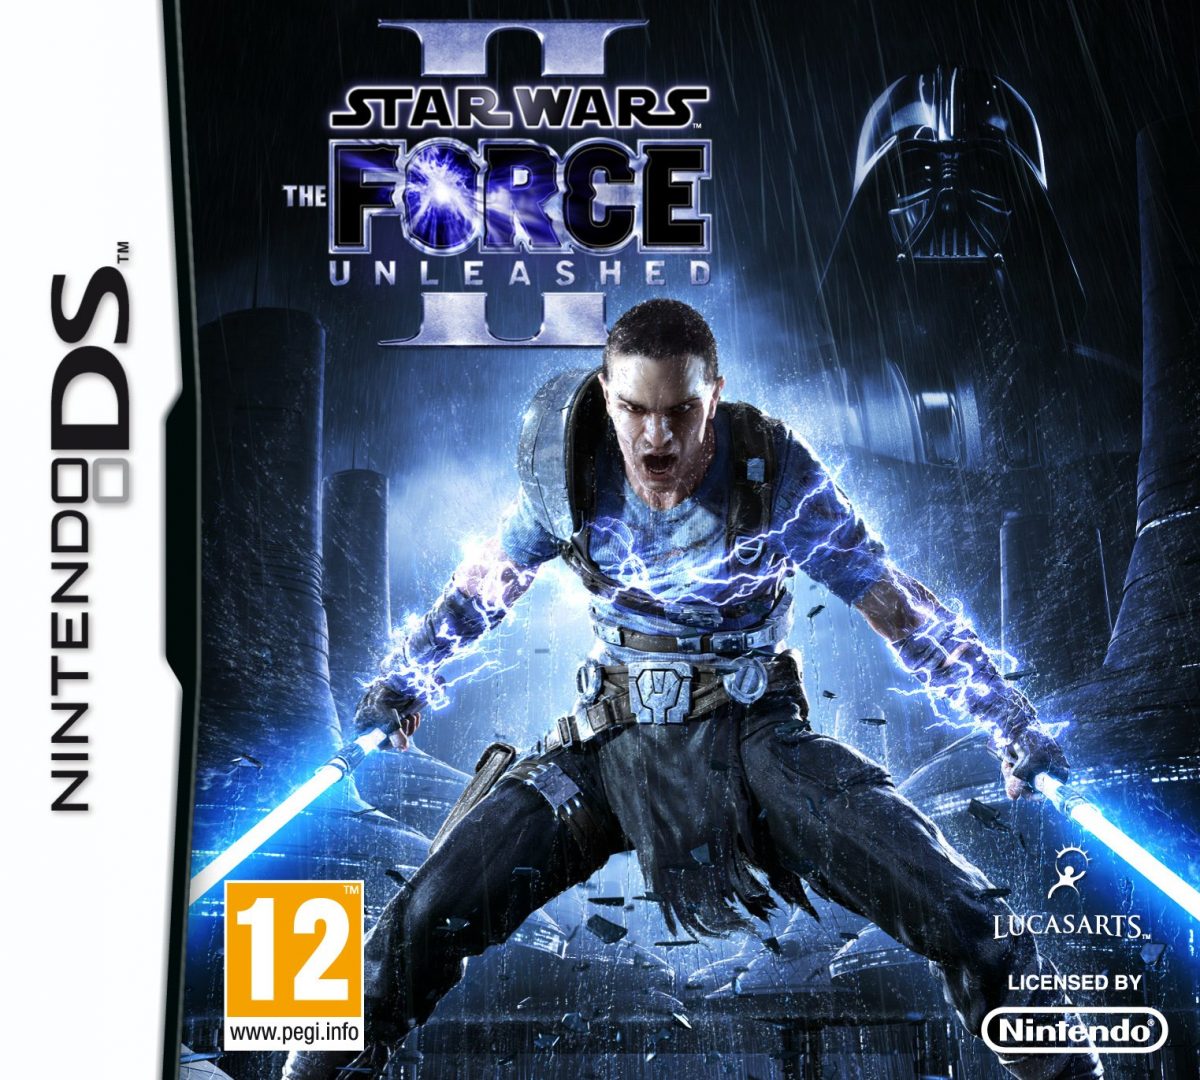 The coverart image of Star Wars: The Force Unleashed II